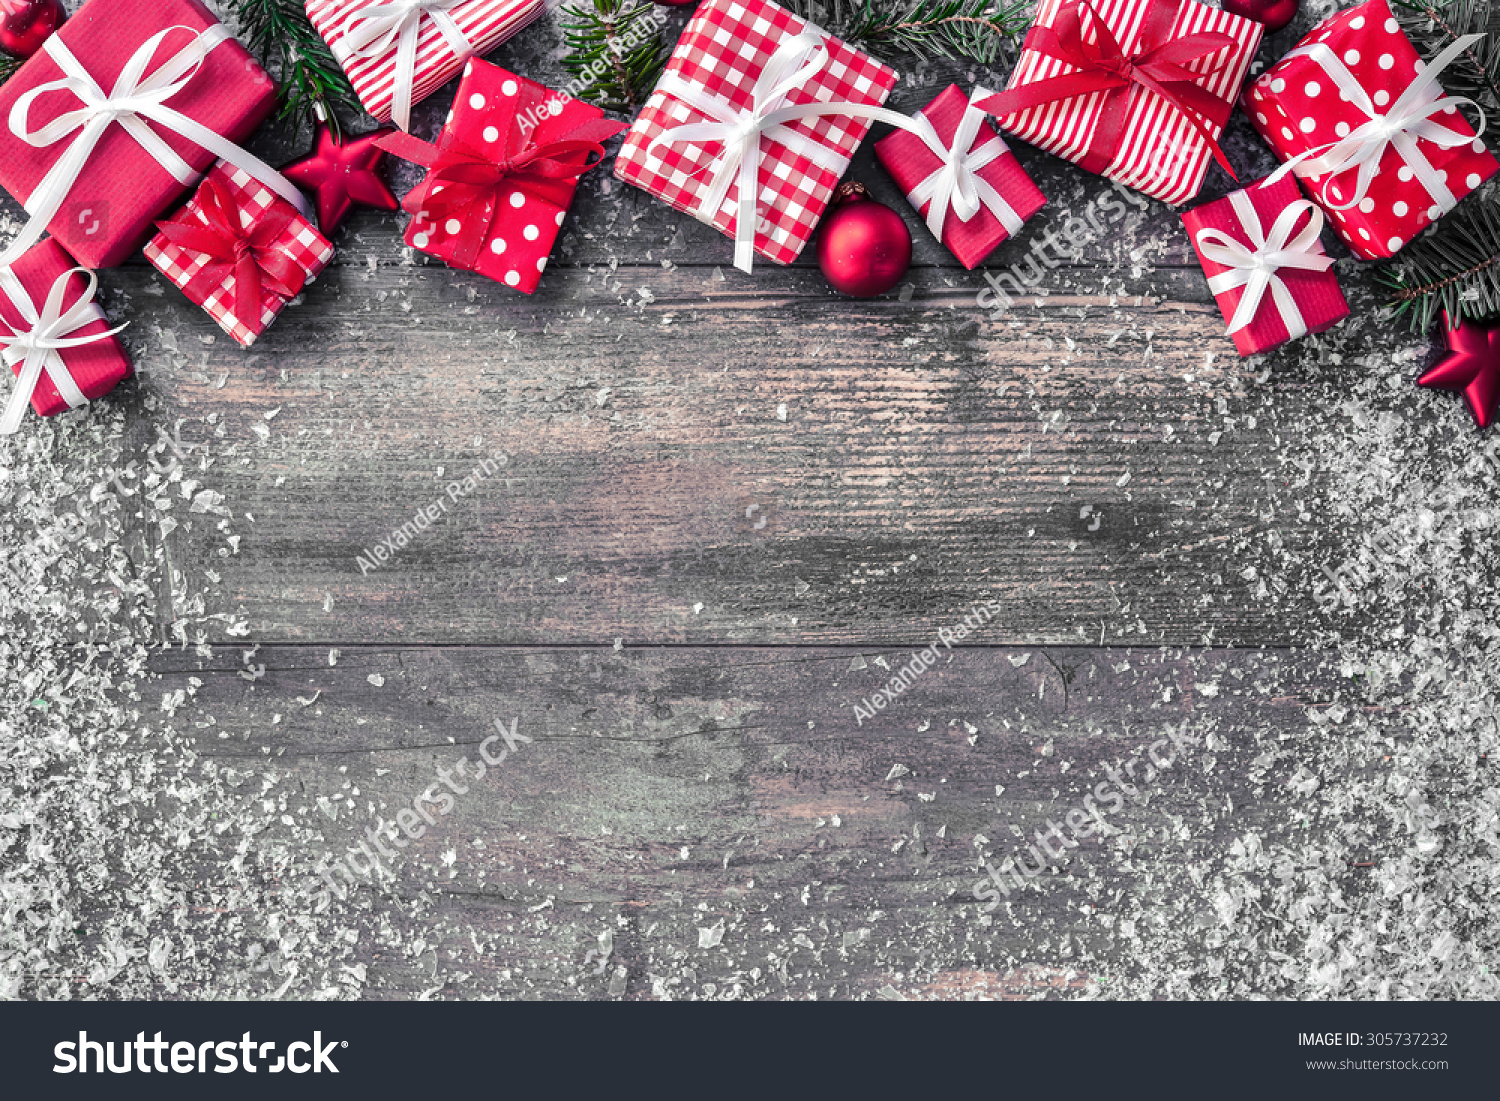 Christmas background with decorations and gift boxes on wooden board #305737232